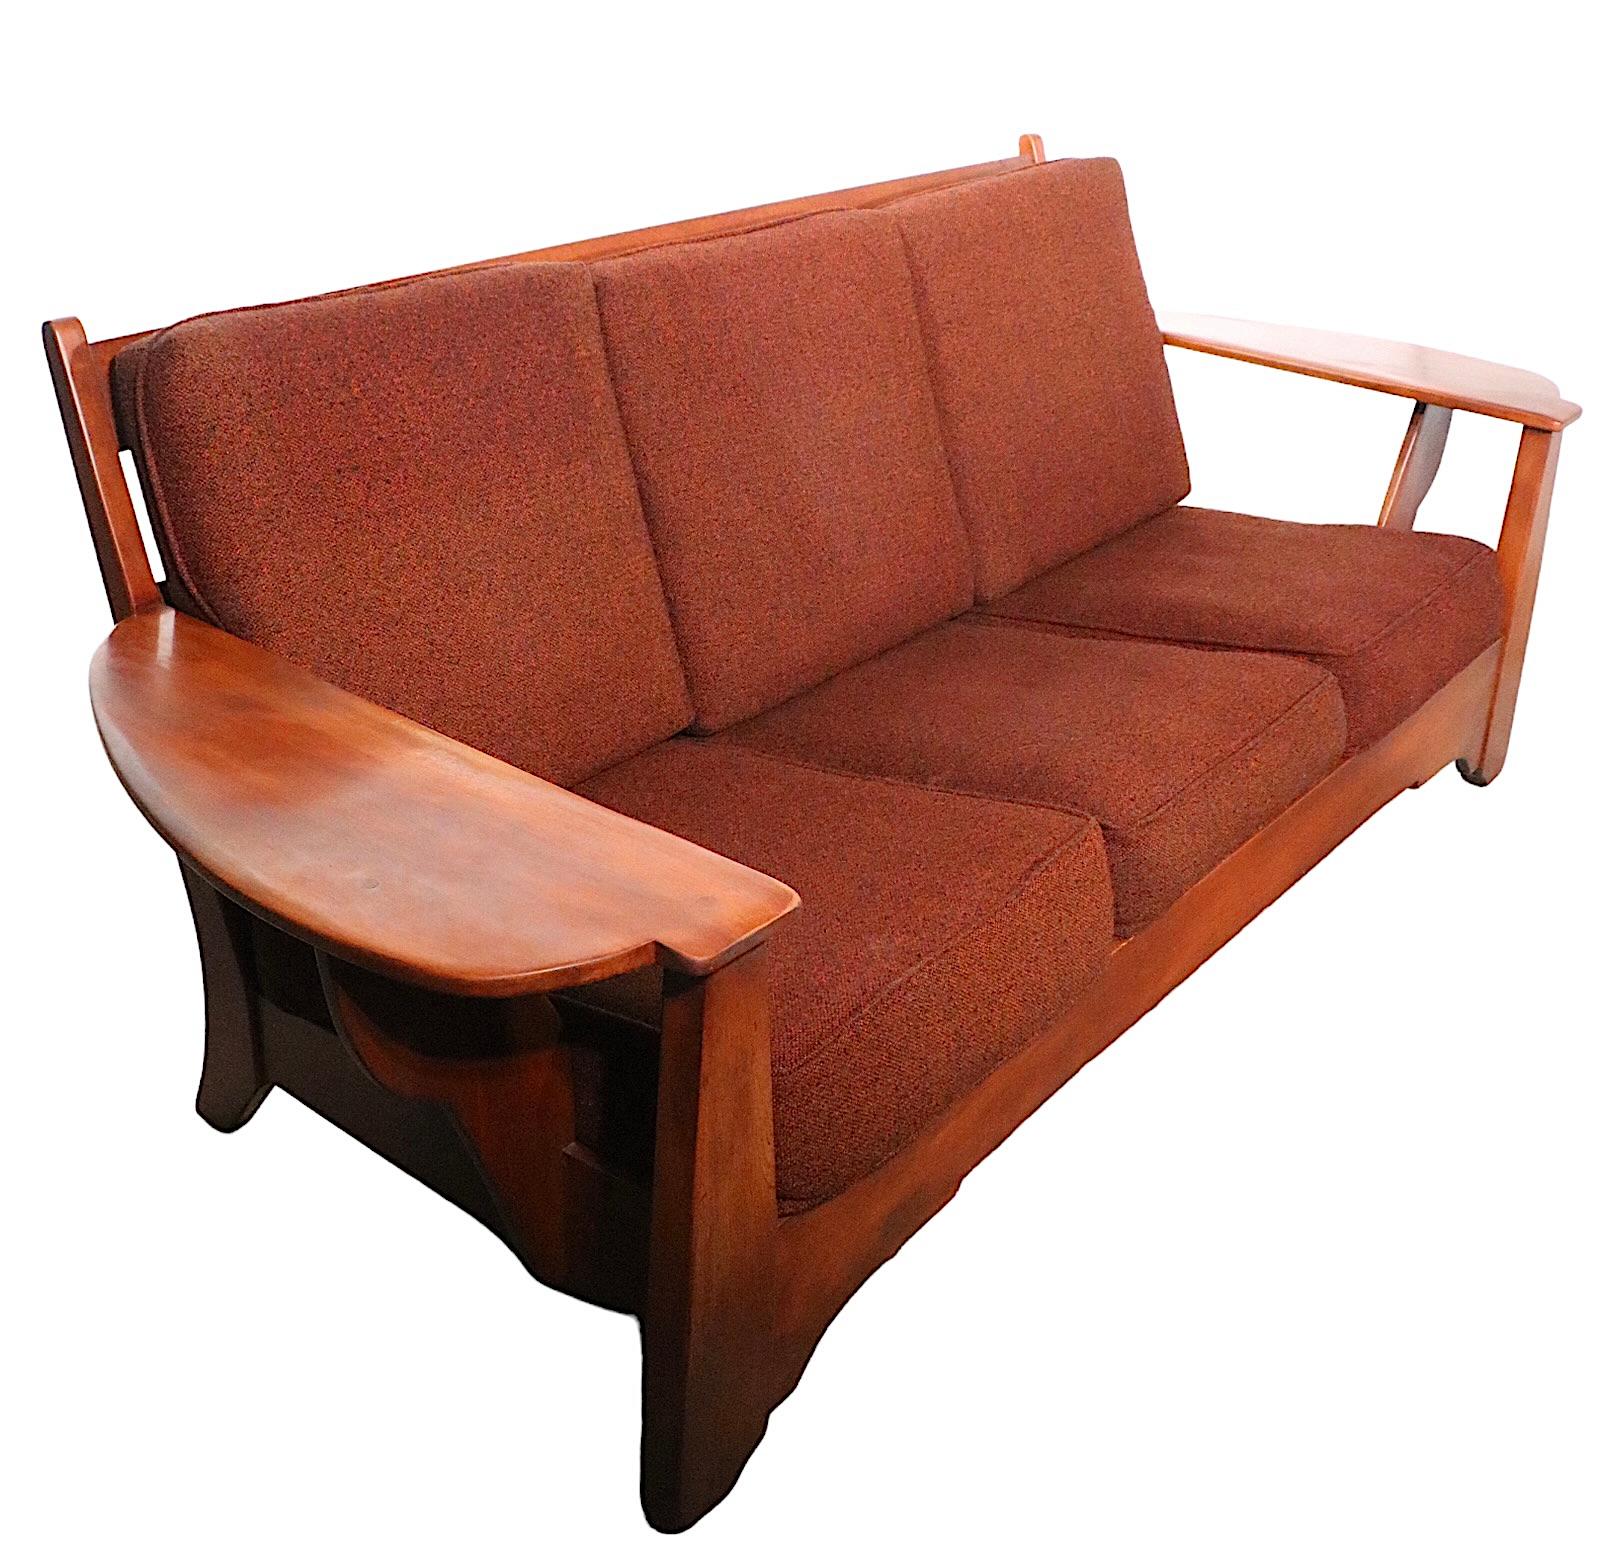 Paddle Arm Cushman Colonial Creations Sofa designed by Herman de Vries 1940s/50s 6